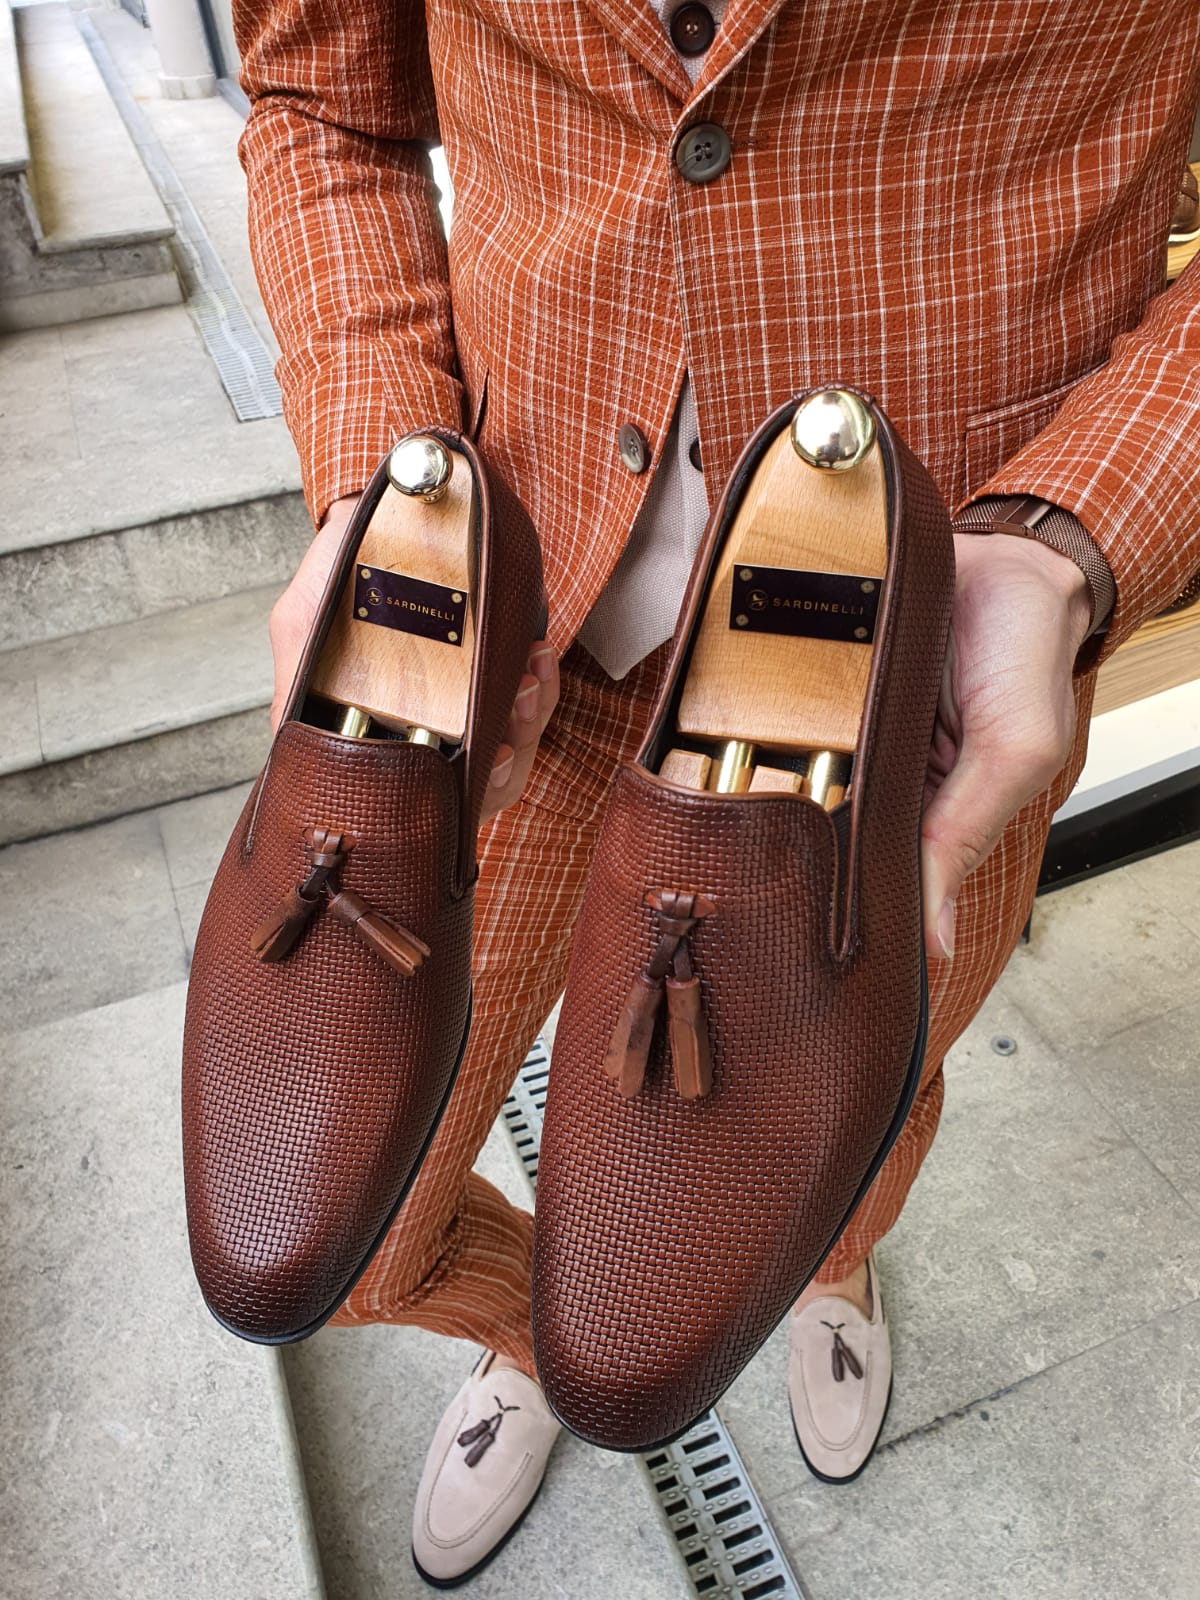 express loafers